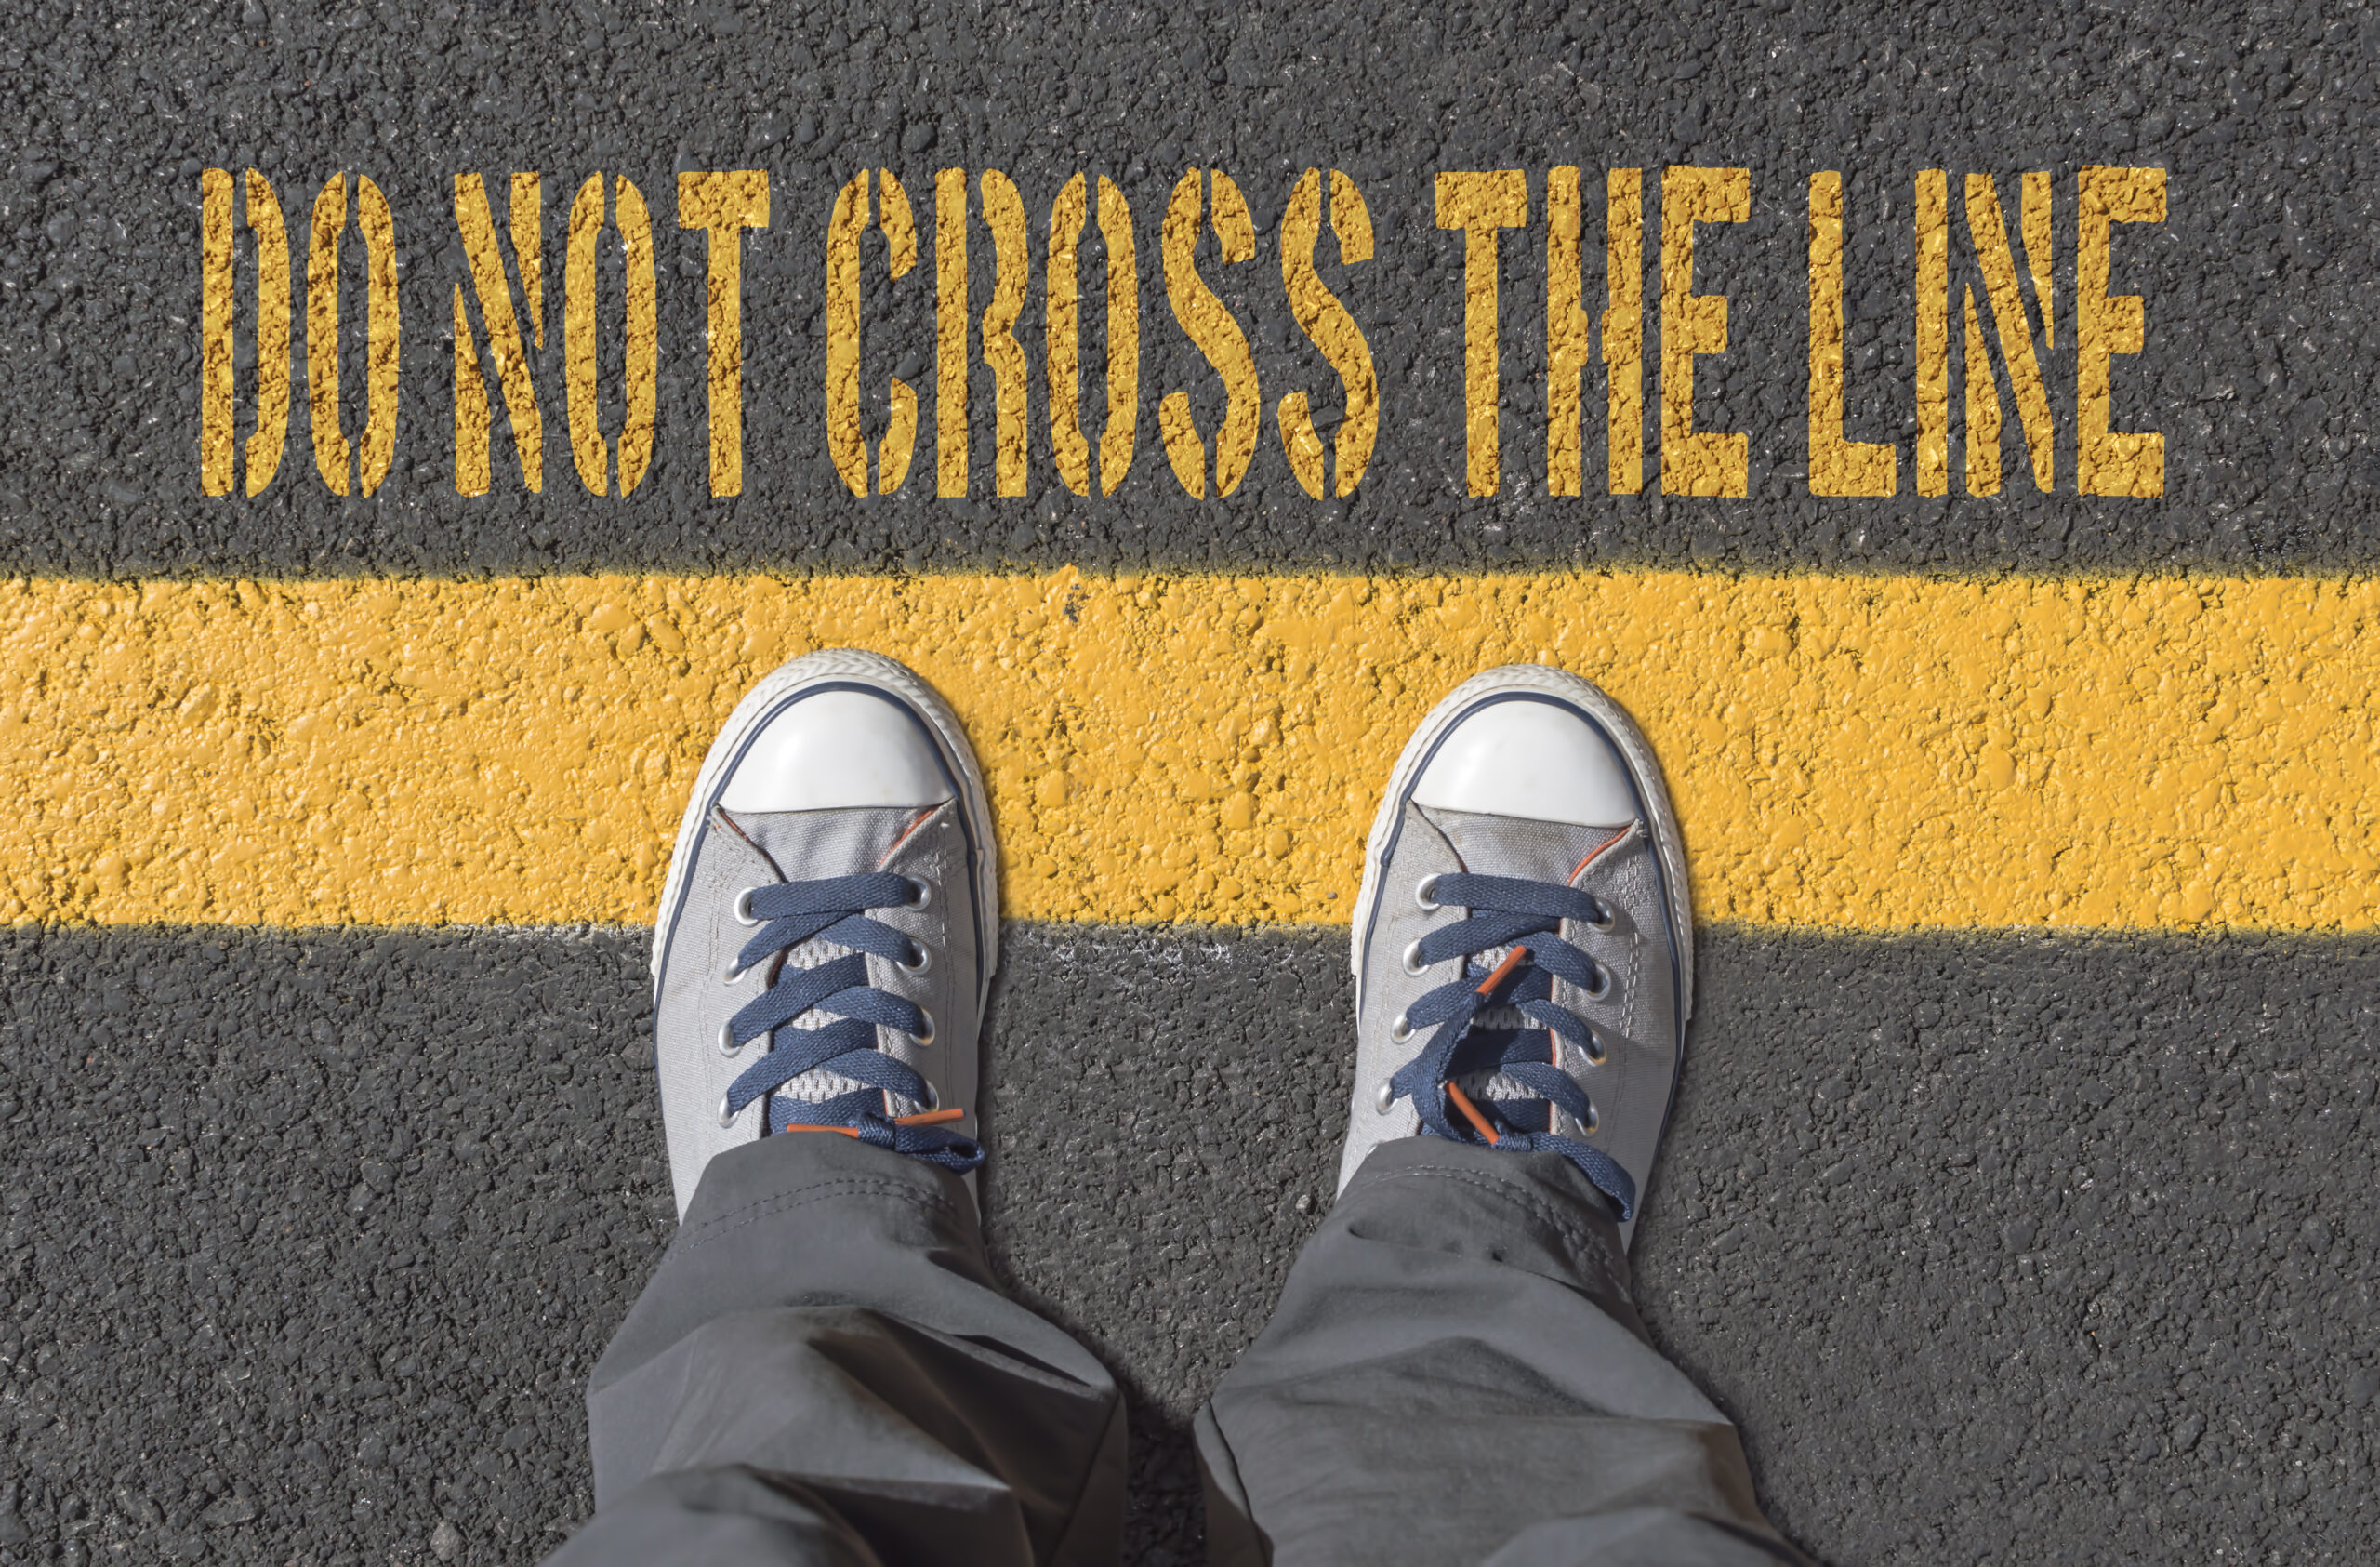 Sneakers standing before a yellow line with writing 'Don't Cross the Line'